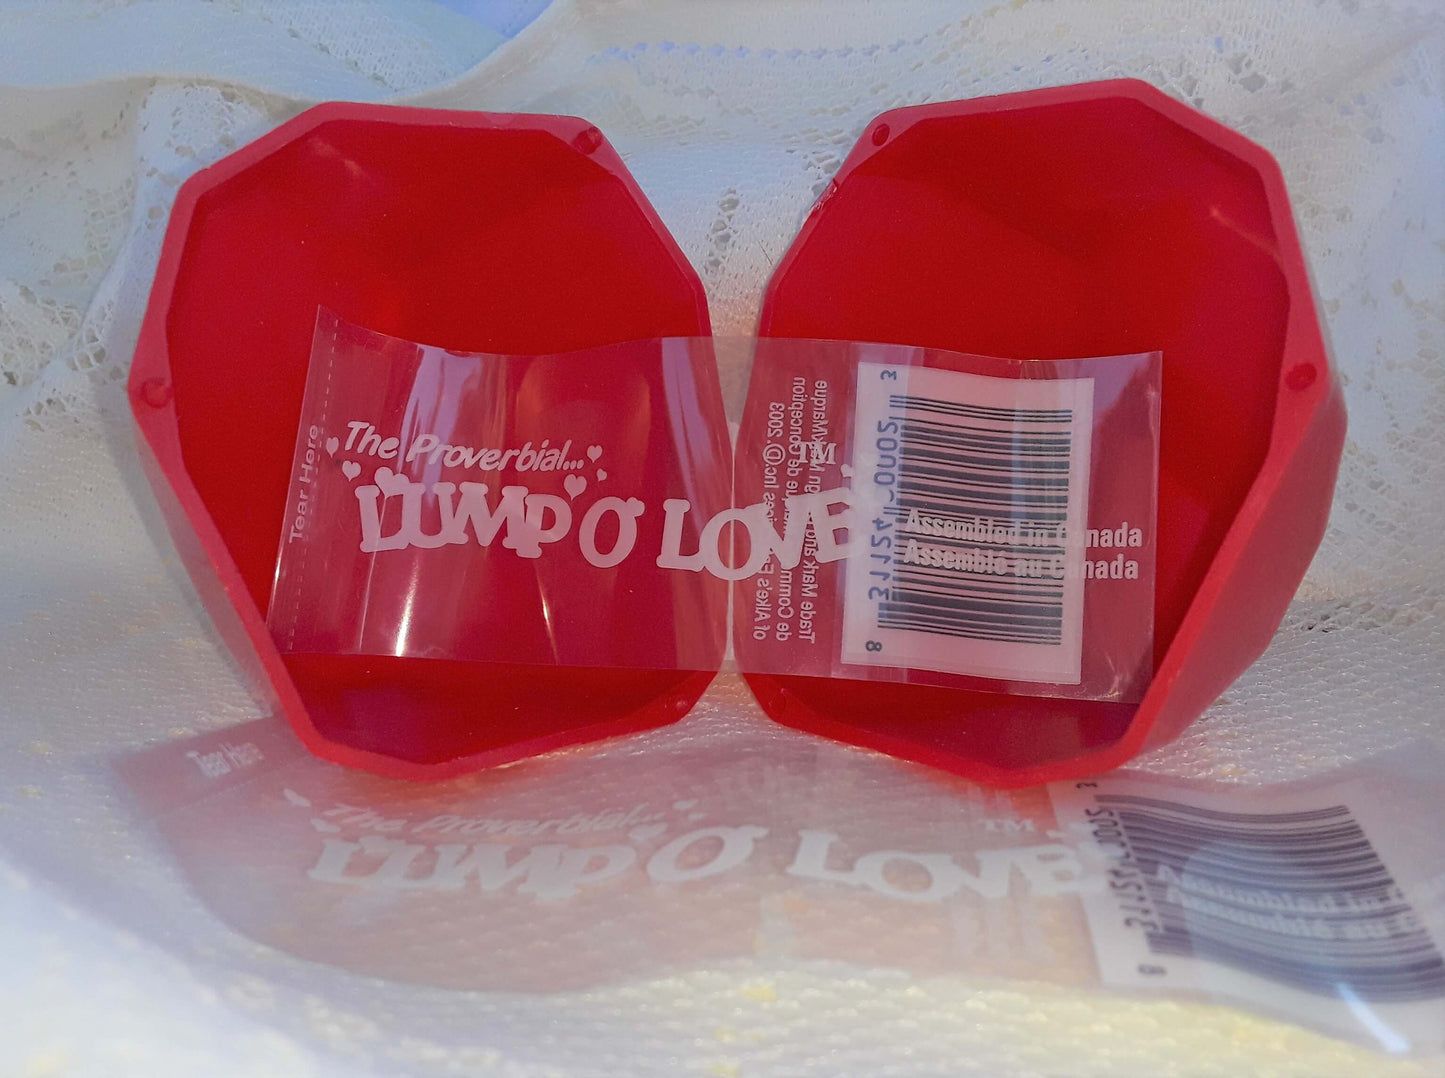 Lump O' Love Container with Shrink TM label only - The Proverbial Lump O' Coal TM